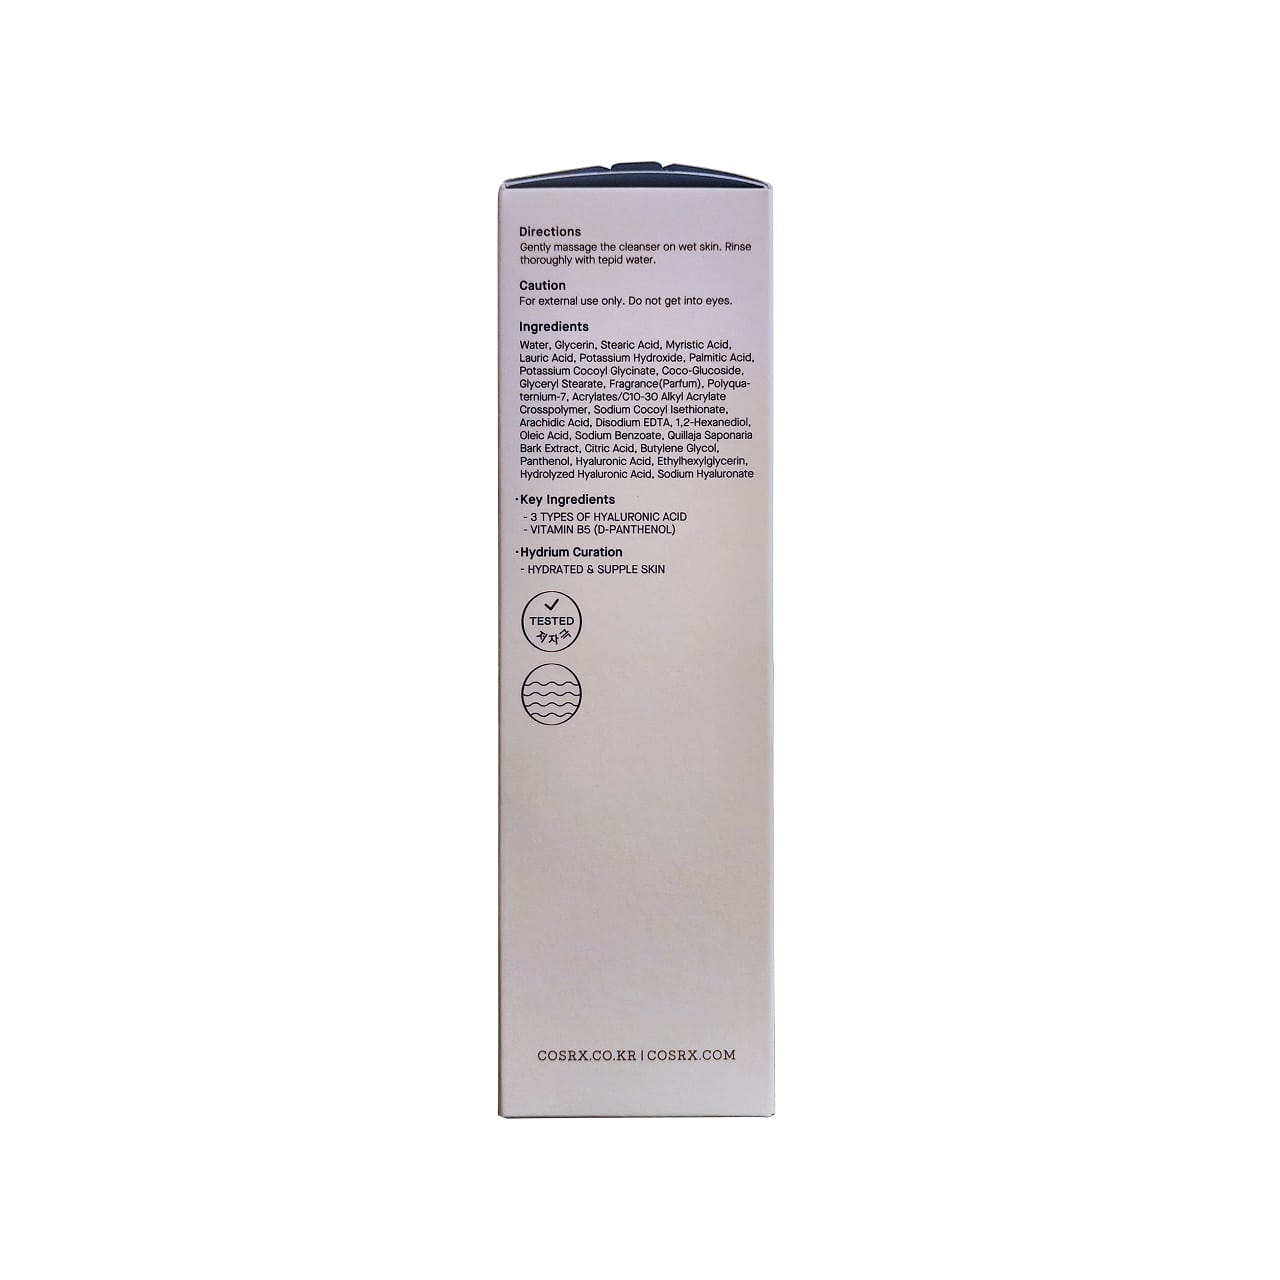 Directions, cautions, ingredients for COSRX Triple Hyaluronic Moisturizing Cleanser (150 mL) in English